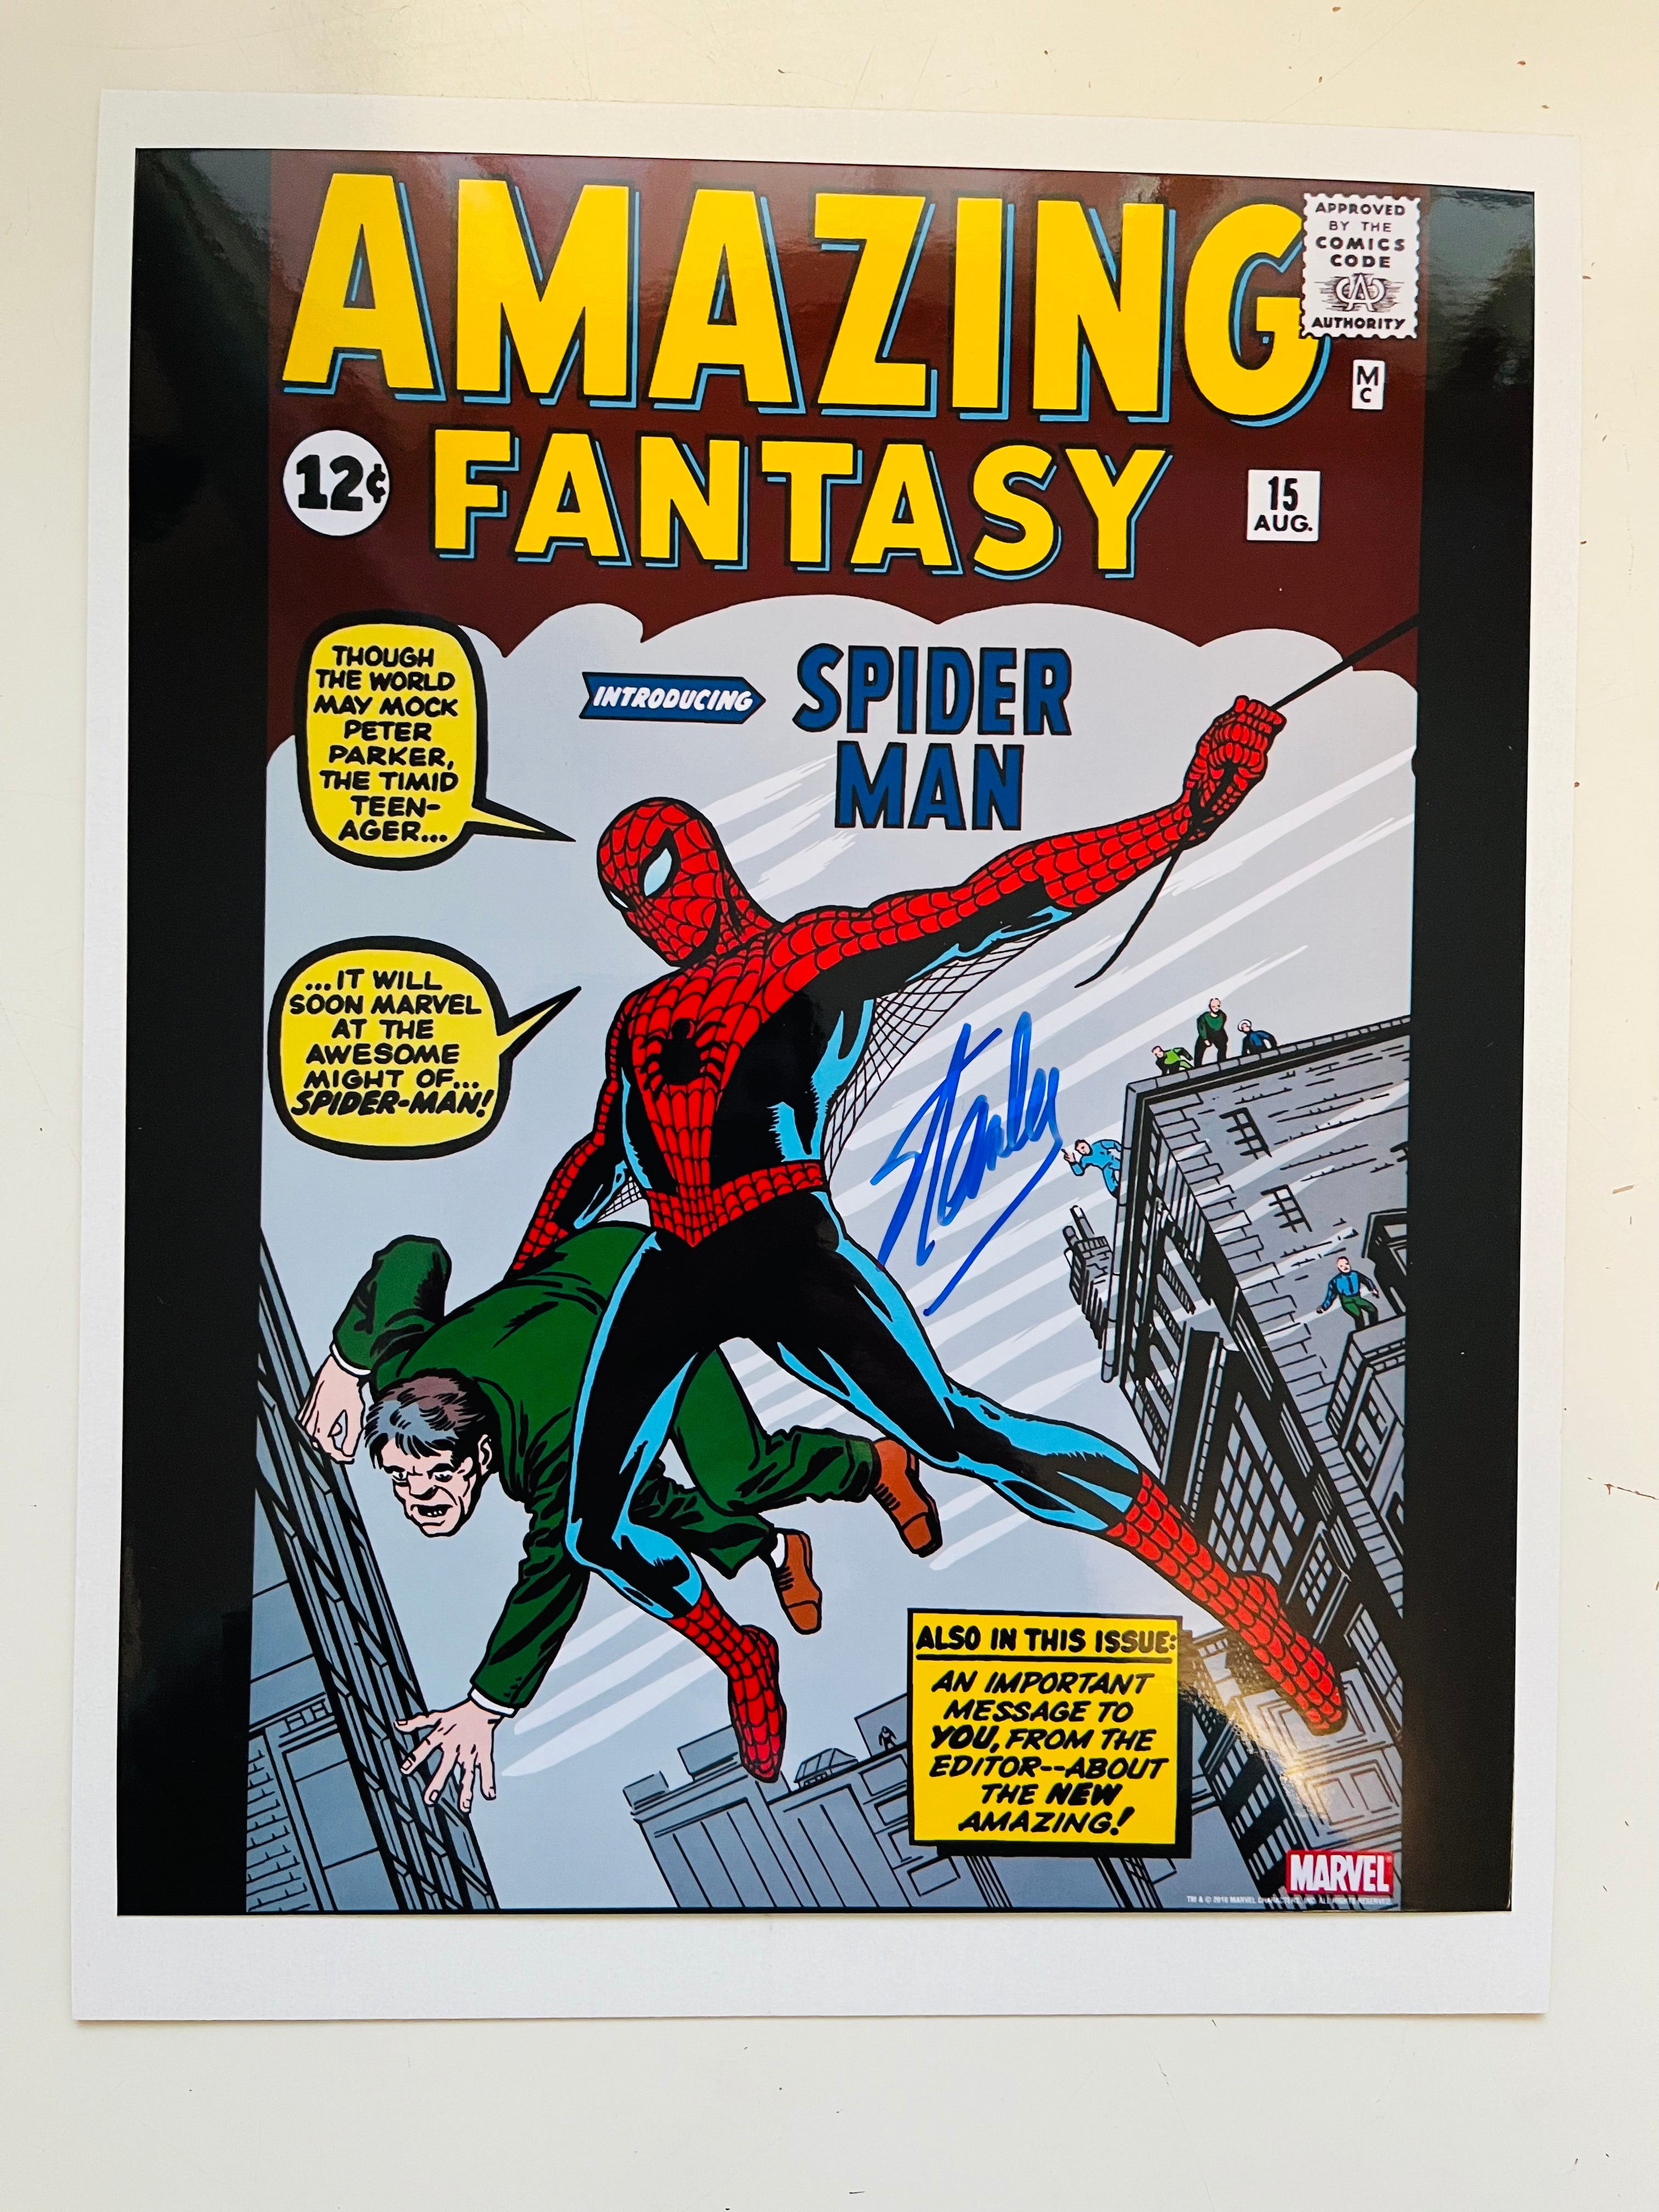 Spider-Man Amazing Fantasy 15 autograph by Stan Lee glossy photo certified by Fanexpo